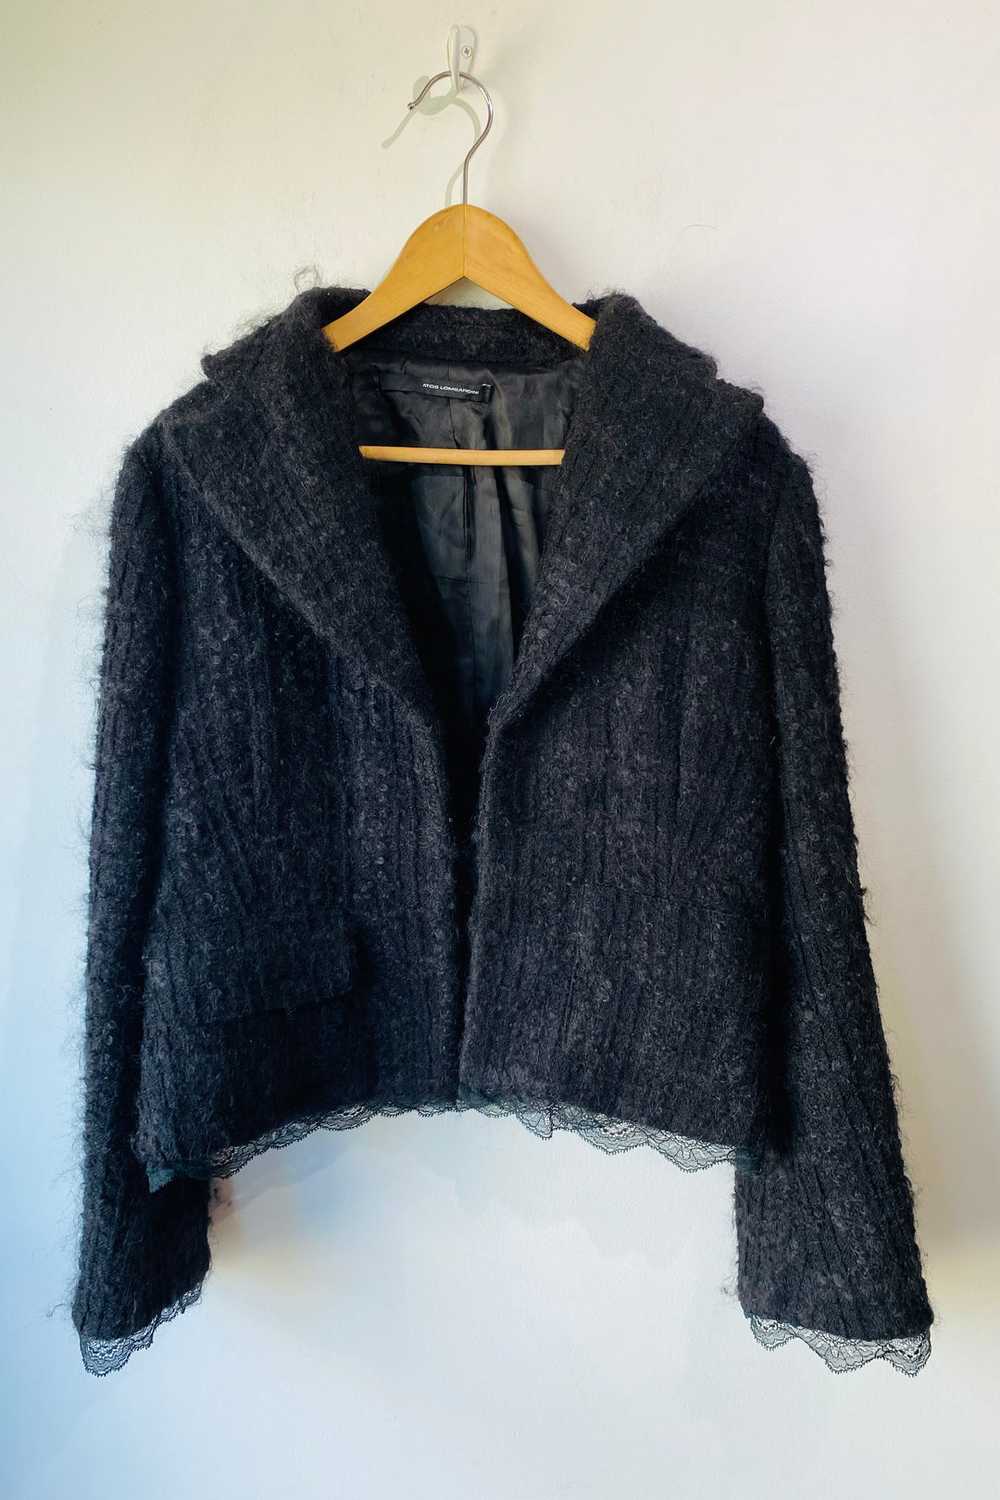 Atos Lombardini Black Mohair and Lace Jacket - image 1